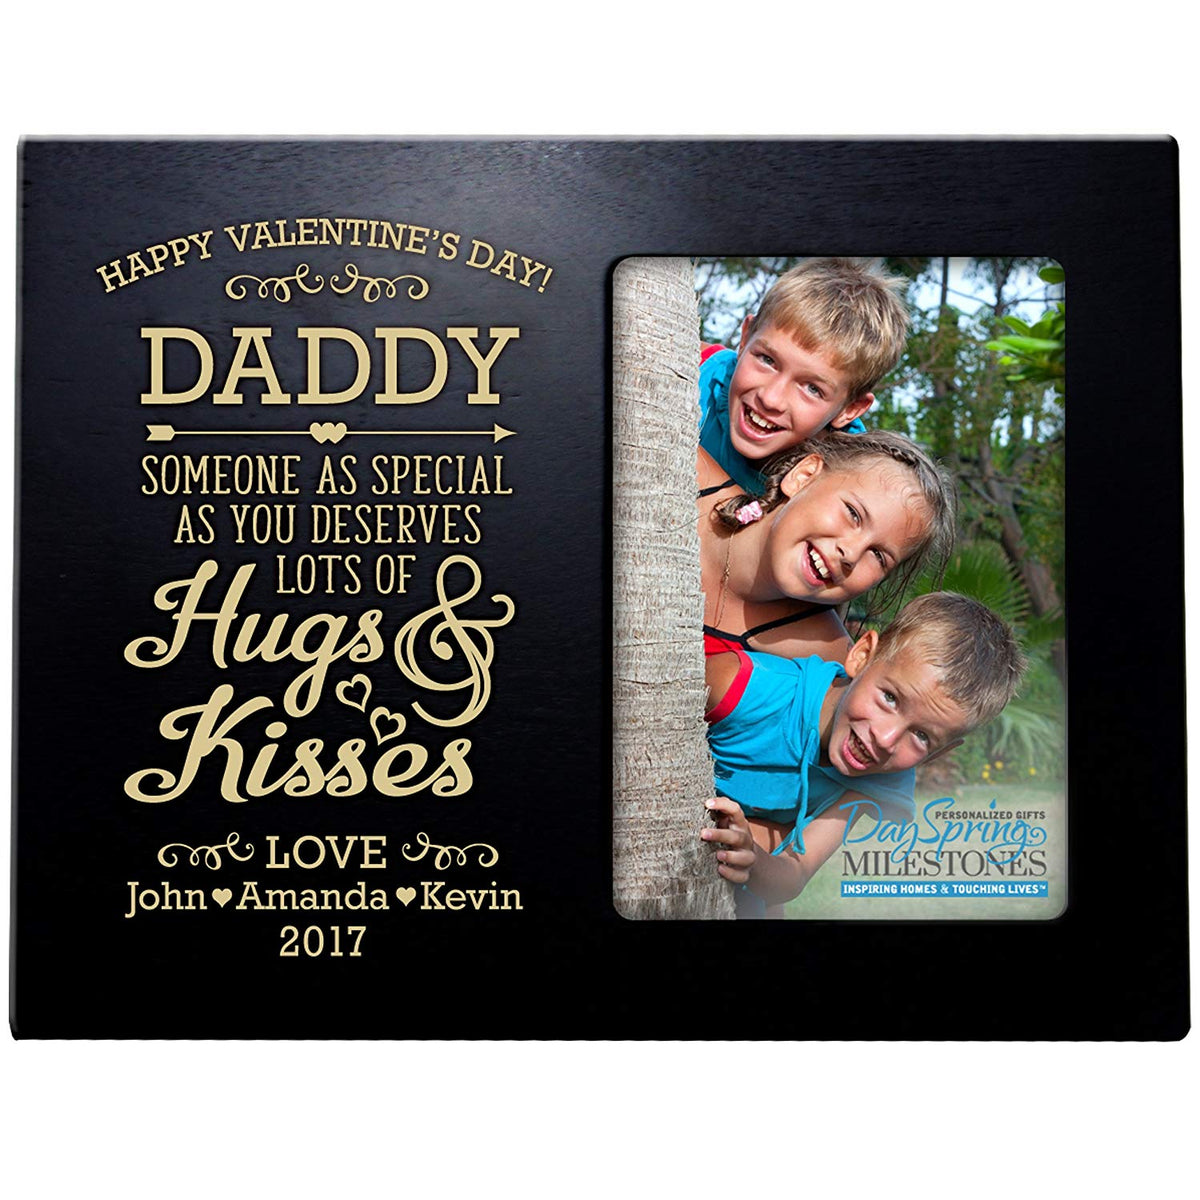 Personalized Valentine&#39;s Day Frames - Happy Valentine&#39;s Day Daddy - LifeSong Milestones